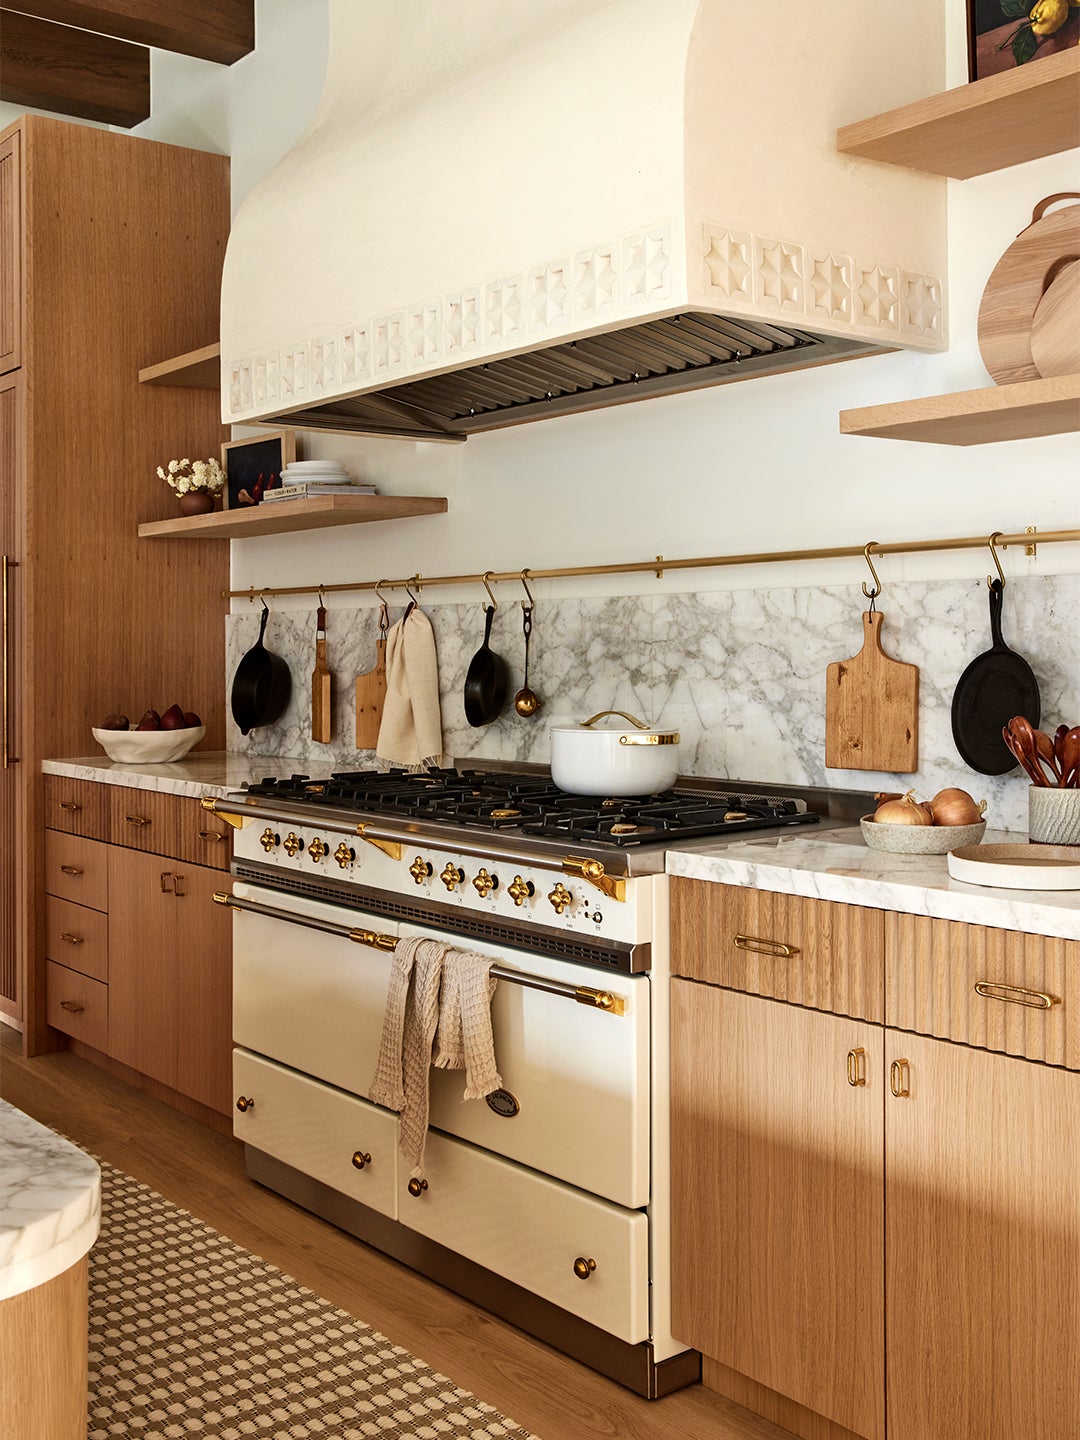 Cream-colored stove and range hood in a kitchen